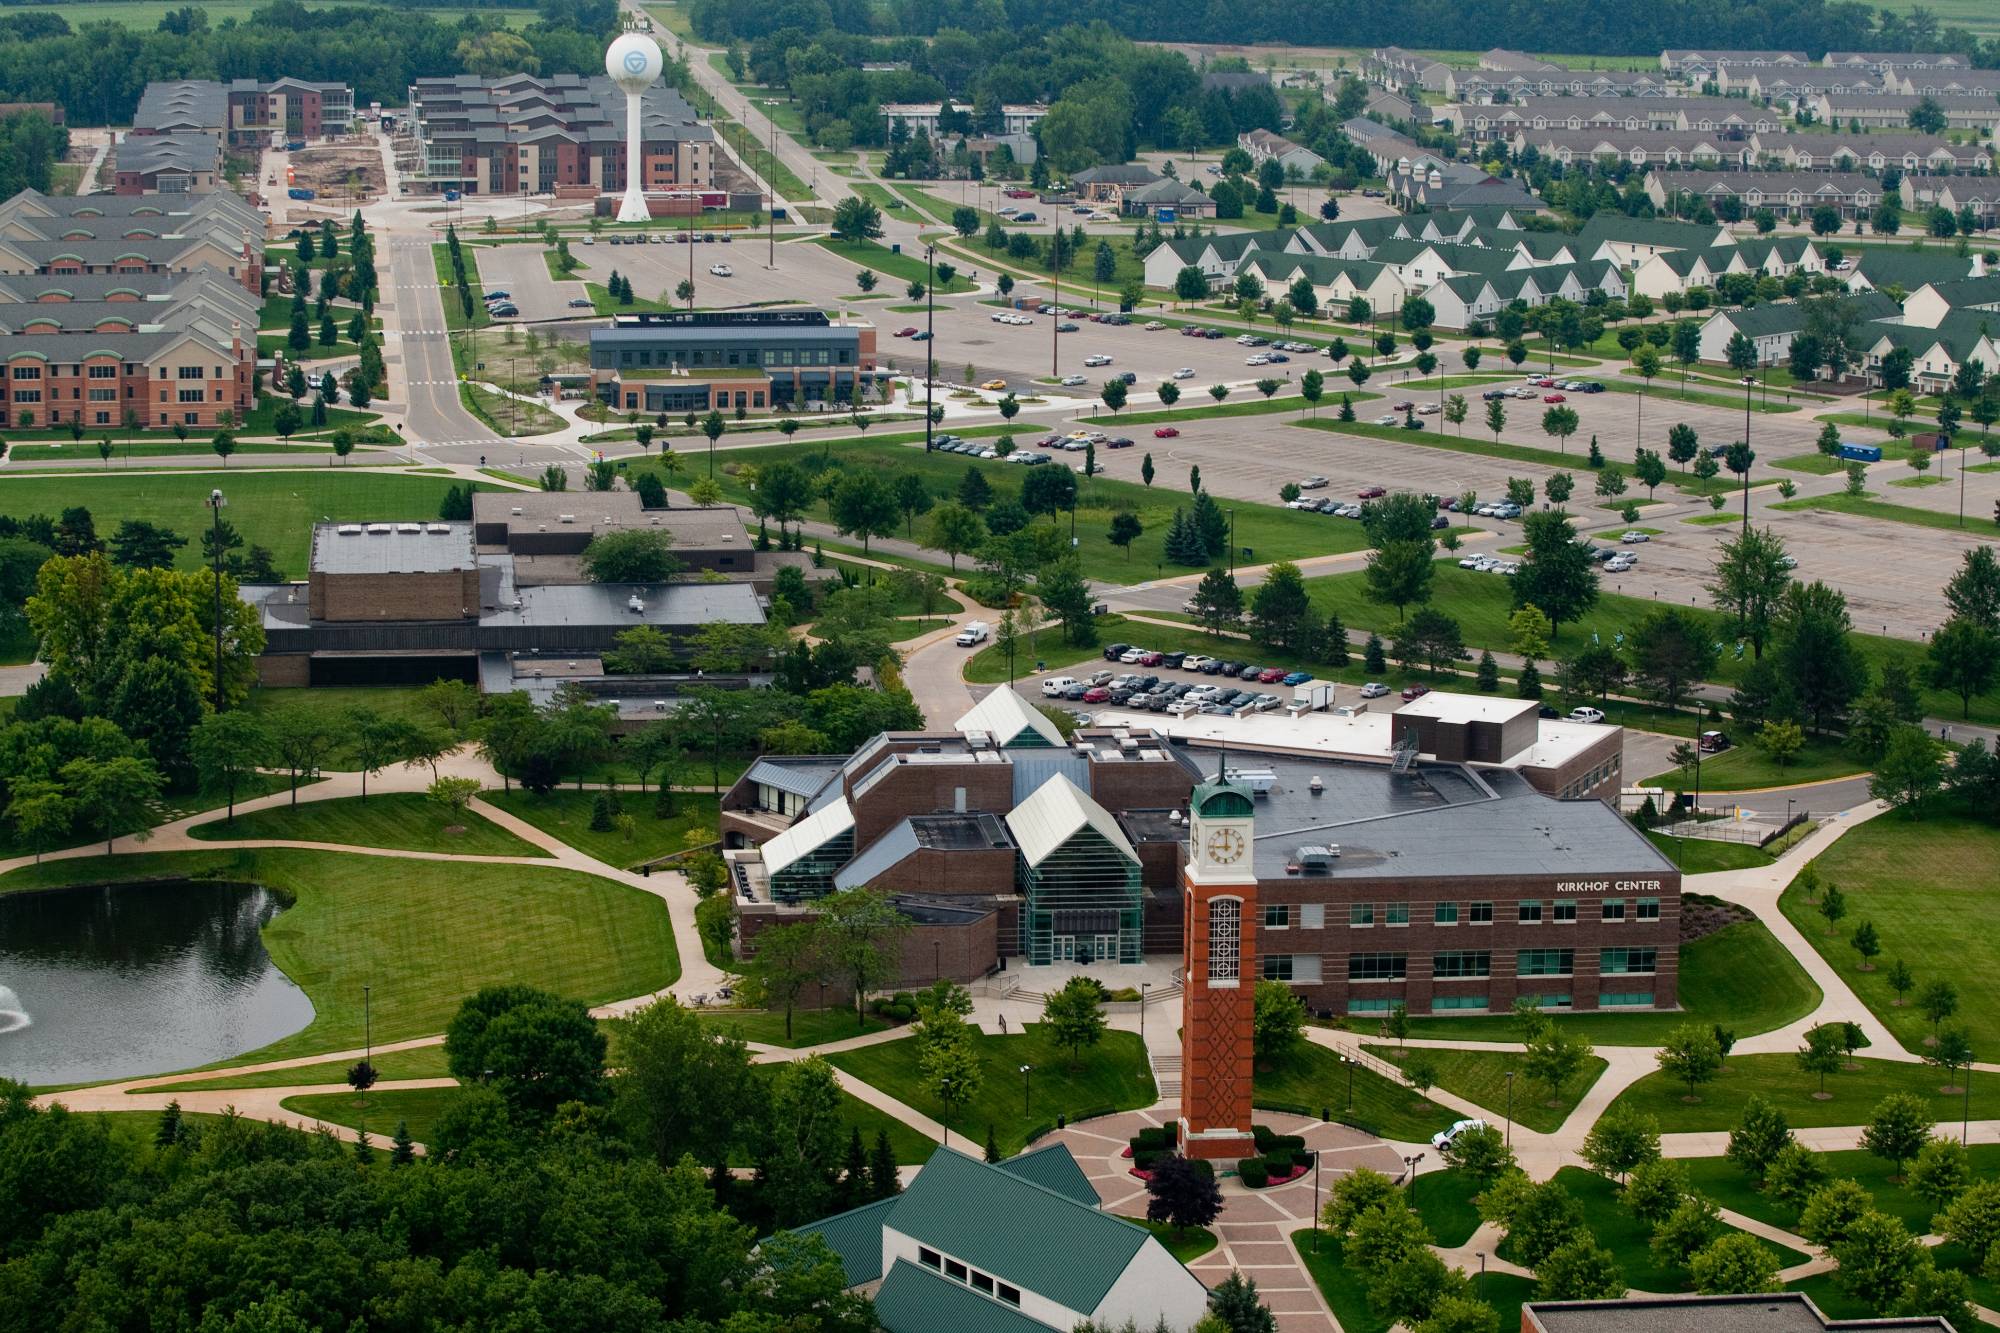 A birds-eye-view of South Campus.